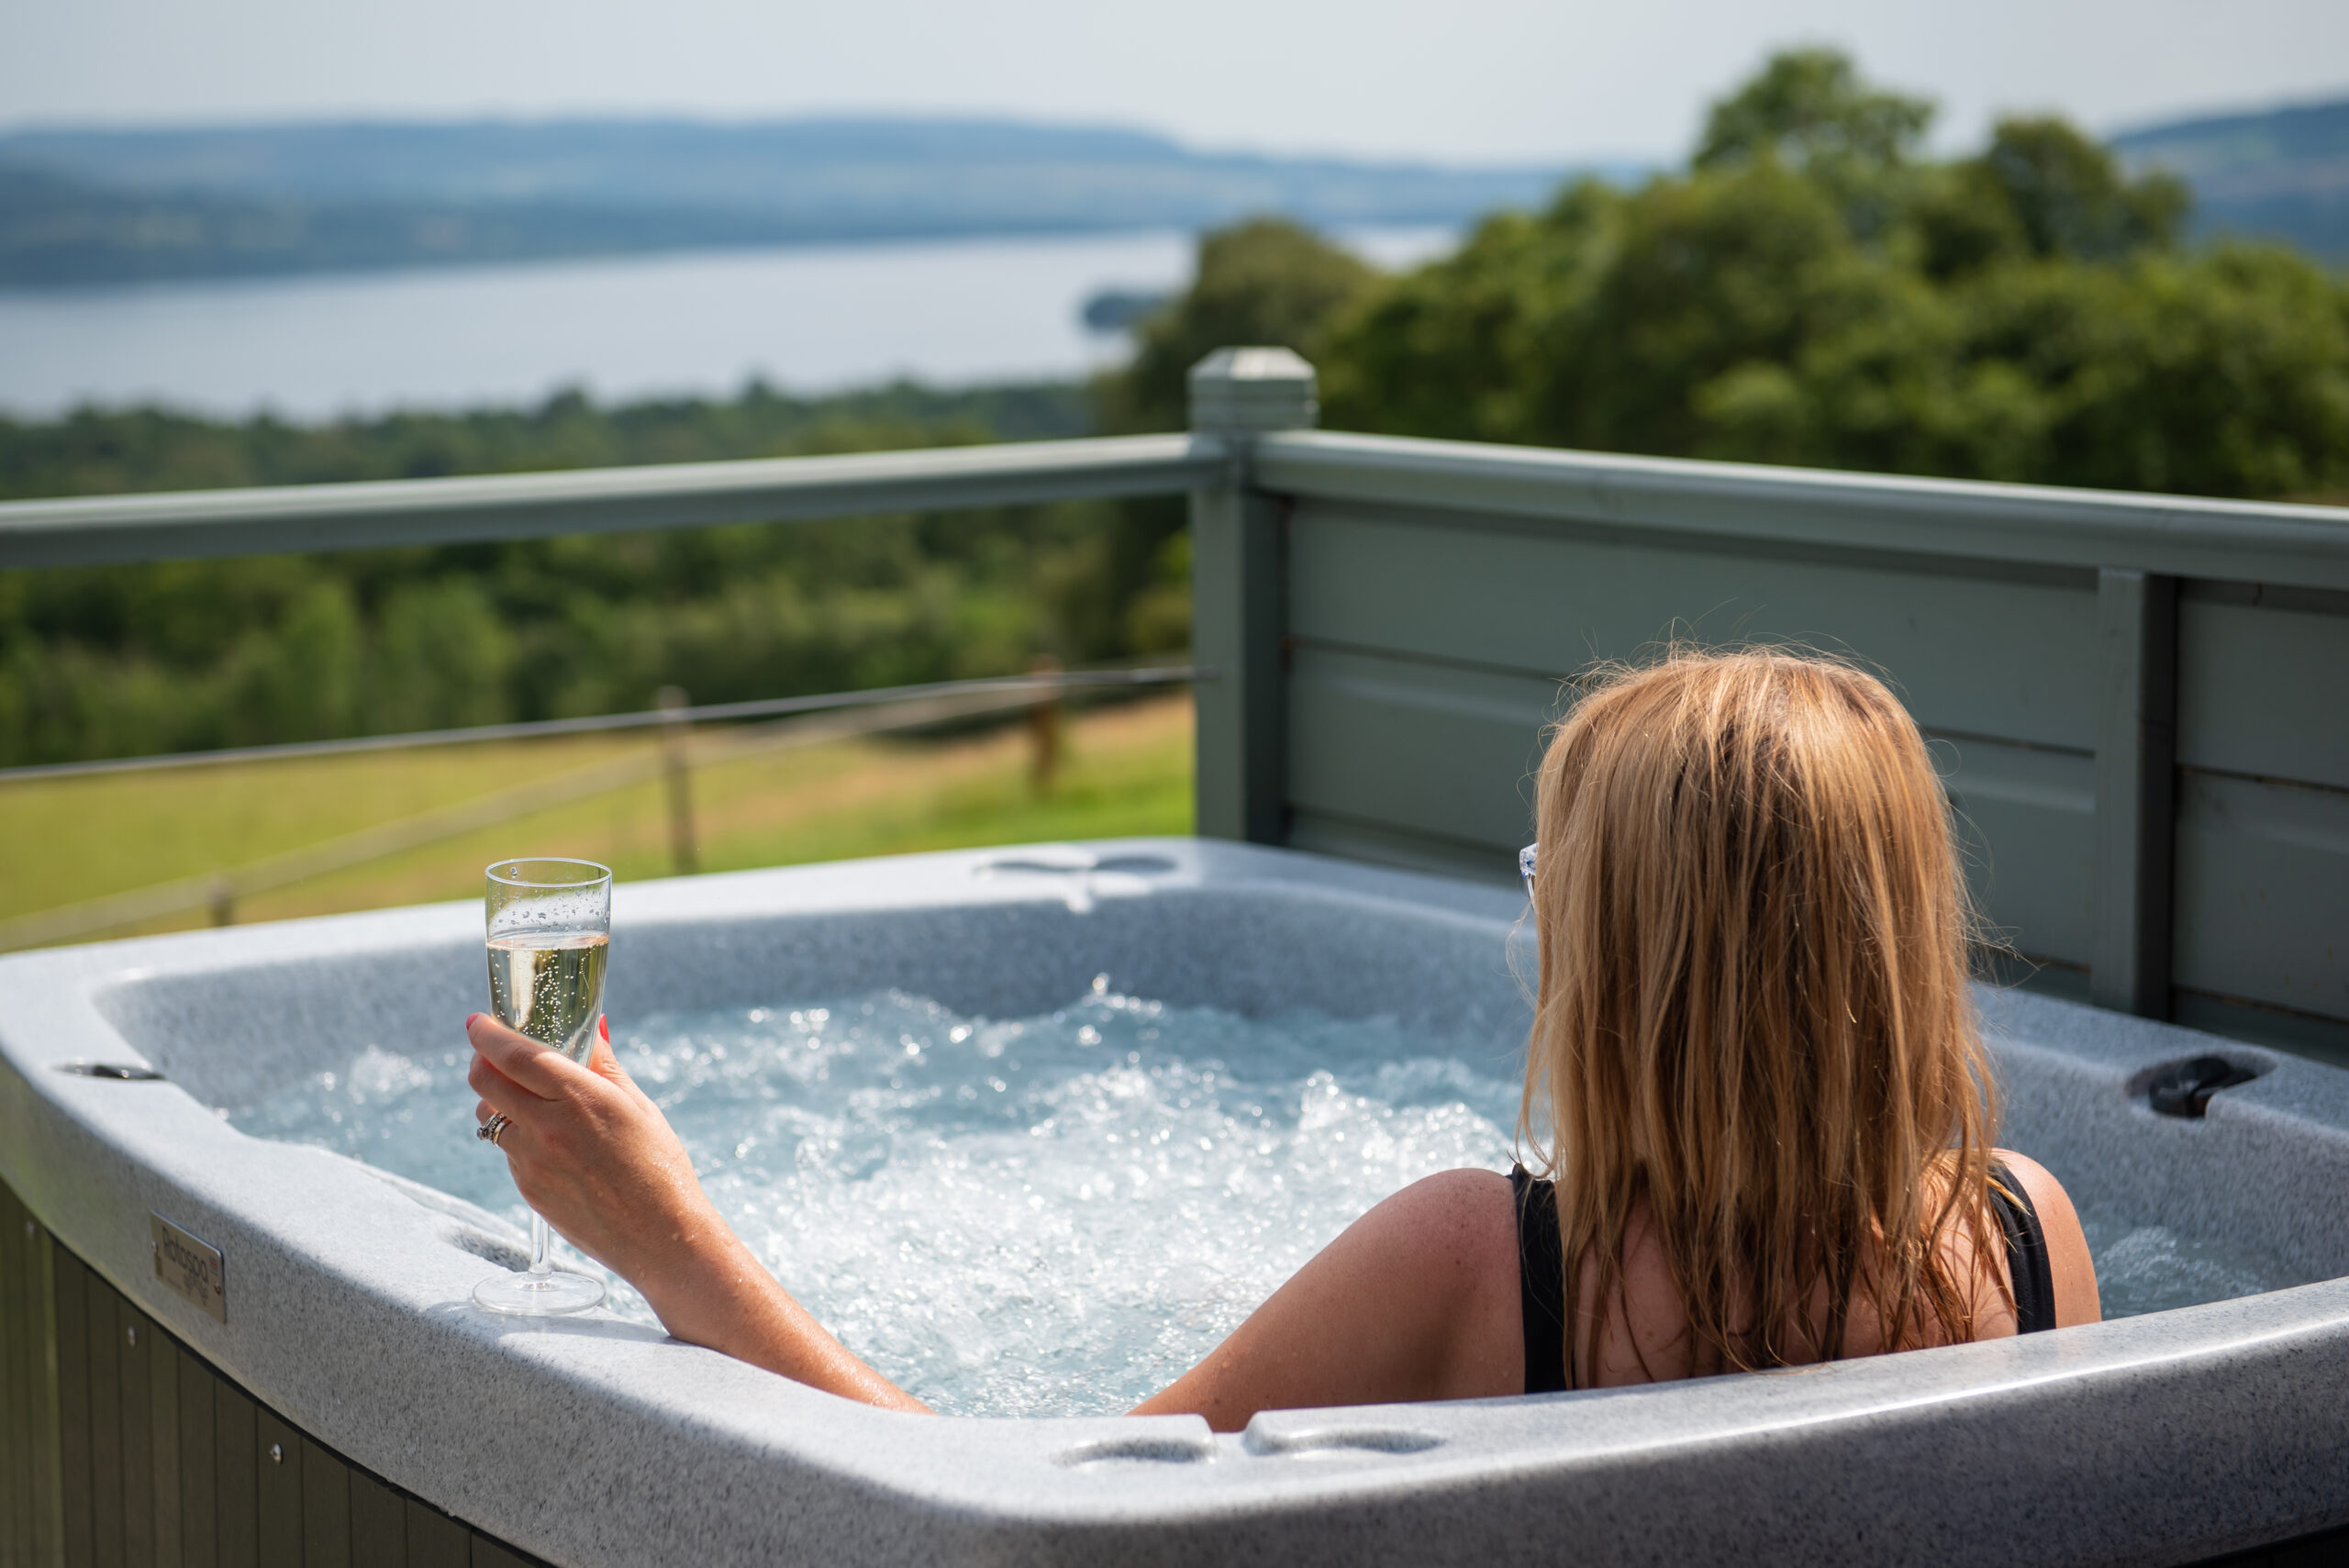 RotoSpa Birmingham | Articles | Everything you want to know about Hot Tubs | Made Right in the UK